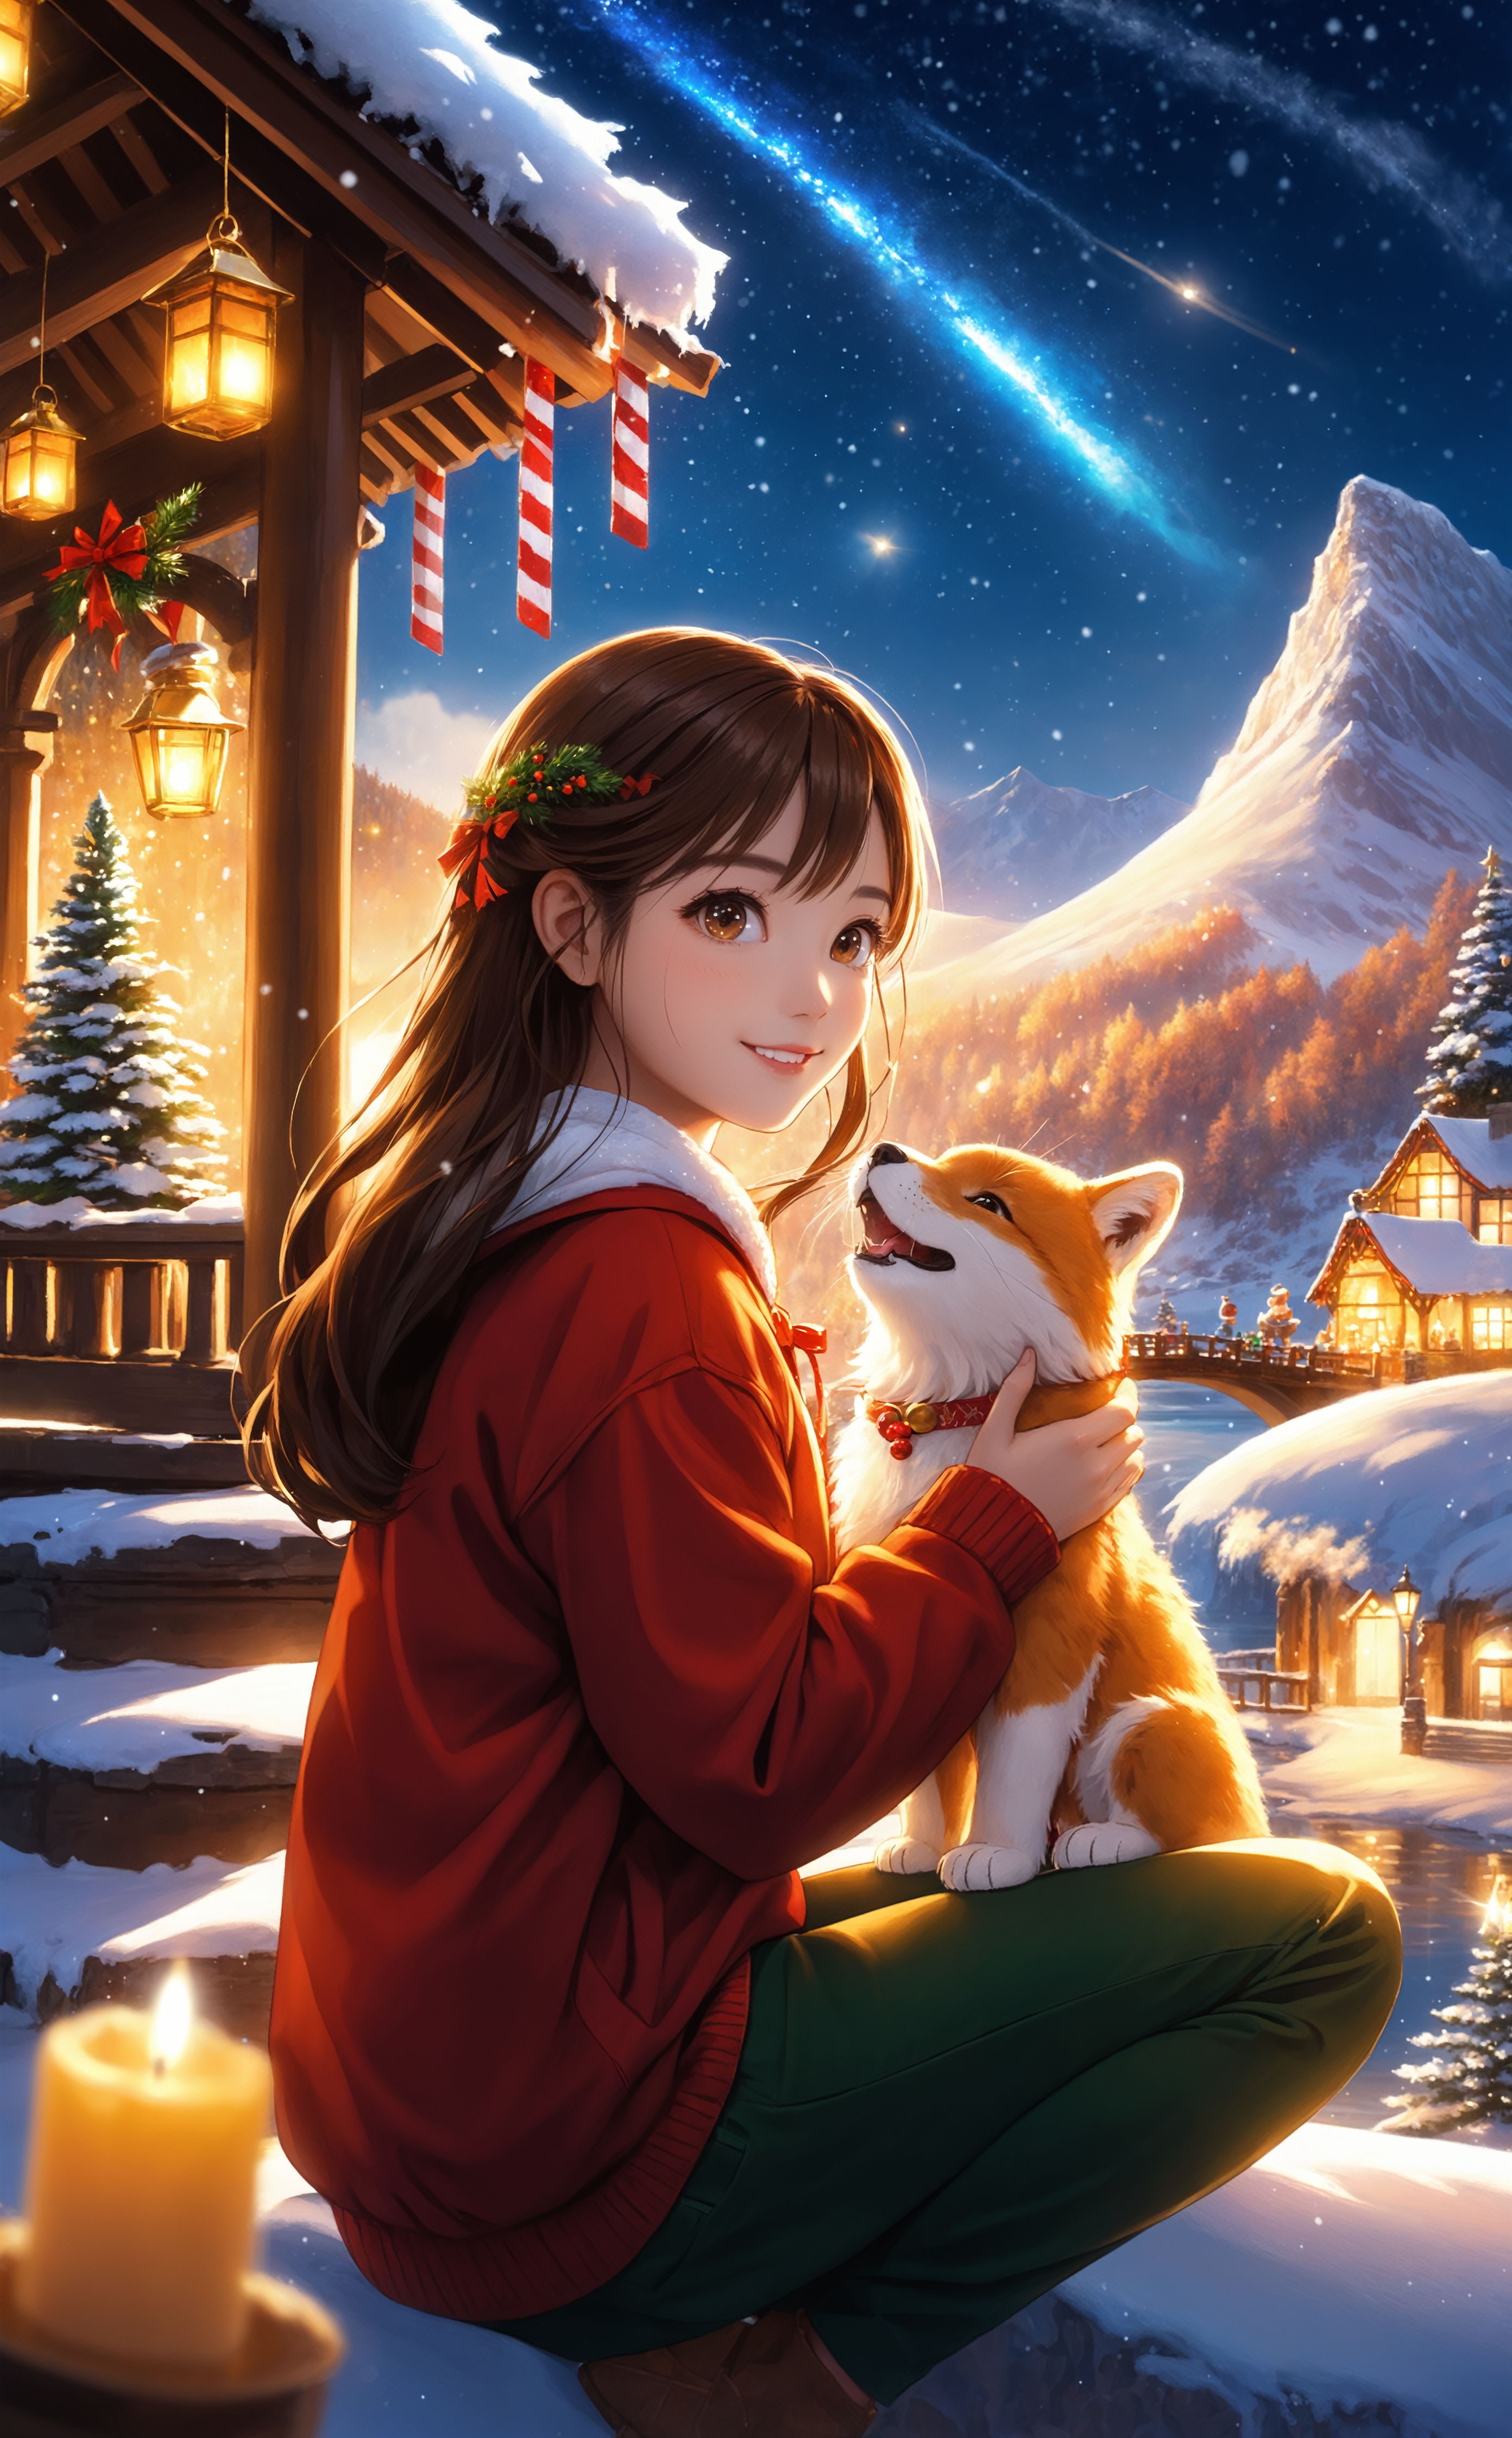 A young woman hugging a brown and white dog in a snowy, Christmas-themed setting.